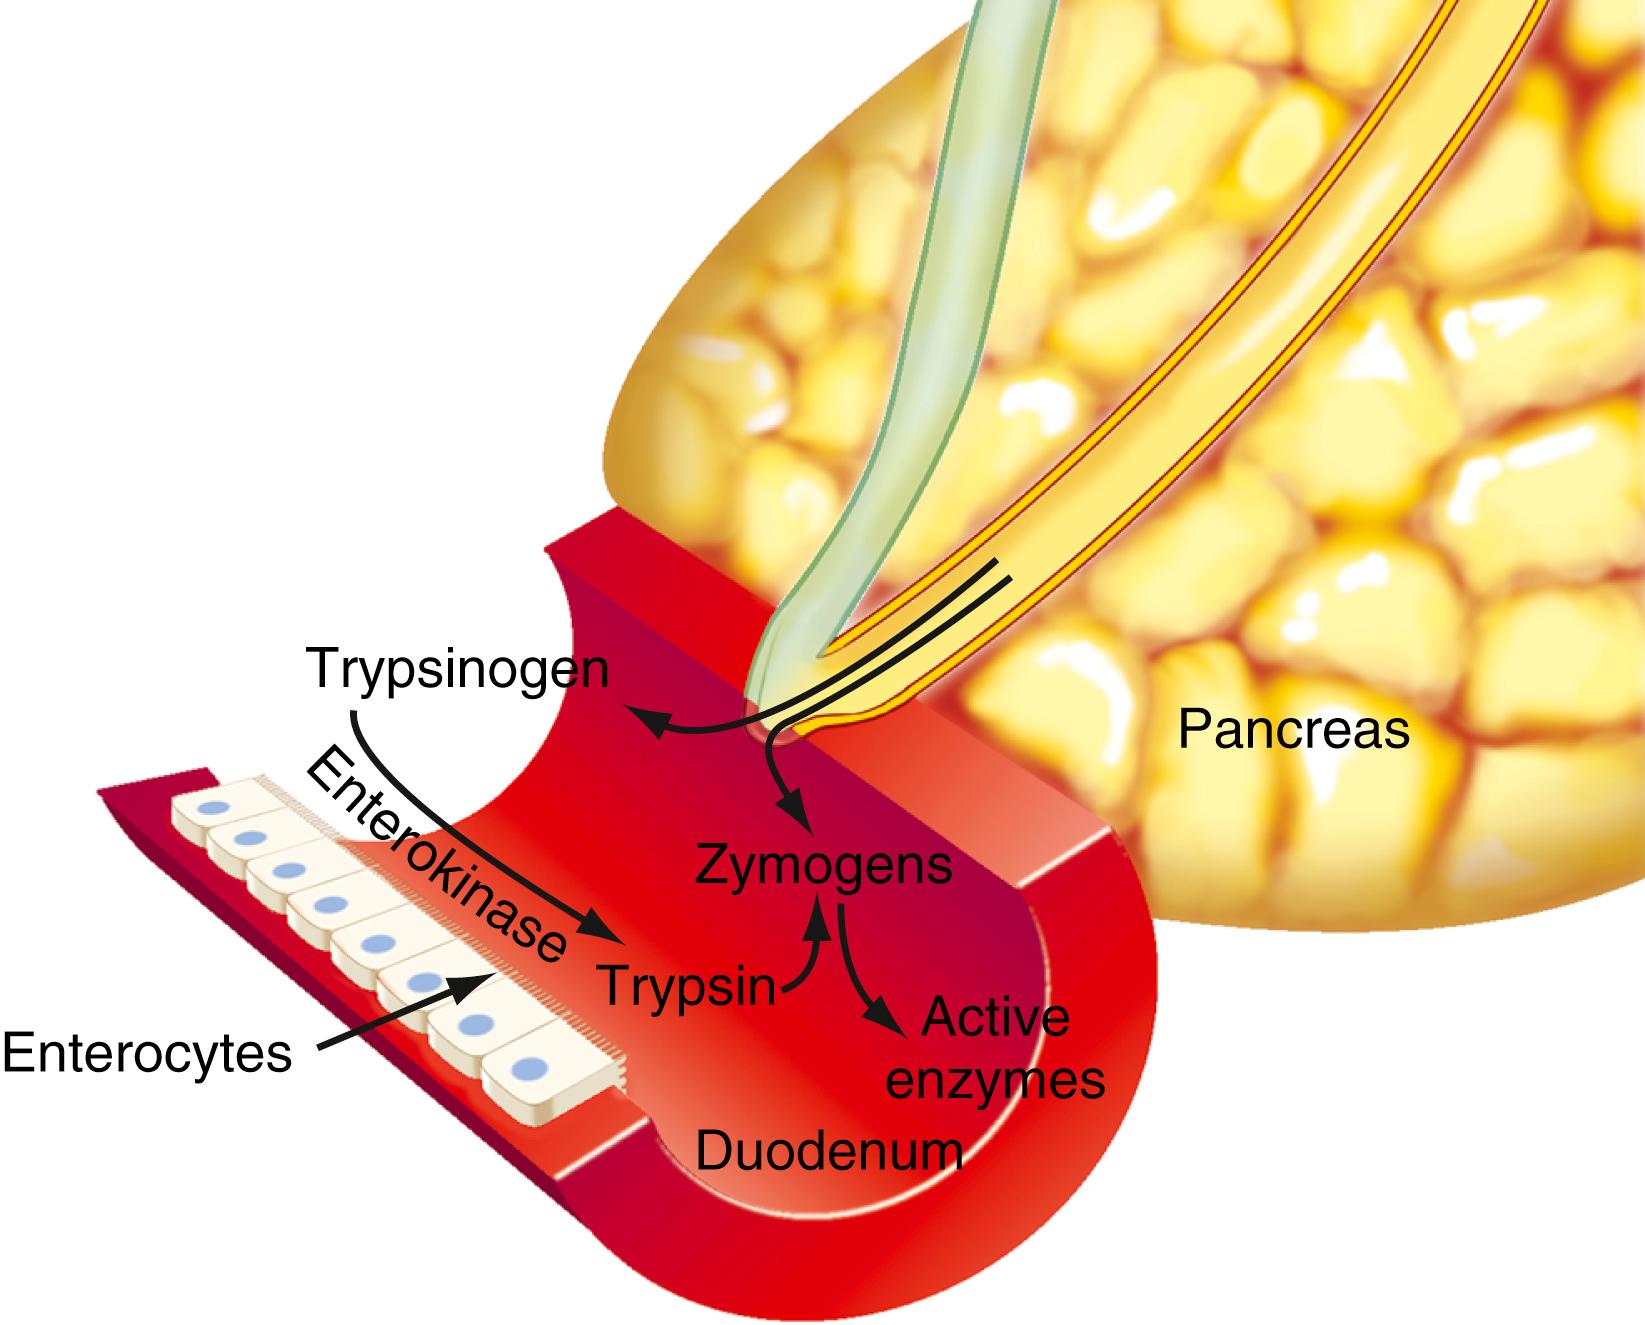 Fig. 56.5, Site of zymogen activation. Trypsinogen, chymotrypsinogen, proelastase, procarboxypeptidase, and prophospholipase A 2 are stored in the pancreas and secreted into the duodenal lumen as inactive proenzyme forms. Other enzymes, such as amylase and lipase, are stored and secreted in their active forms. The active forms of these latter enzymes have no effect on the pancreas because it does not contain starch or TG. Activation of the inactive proenzymes takes place in the duodenal lumen. There, the brush-border enzyme enterokinase converts secreted trypsinogen to trypsin. Trypsinogen and the other proenzymes are then converted to active forms by proteolytic cleavage by trypsin.